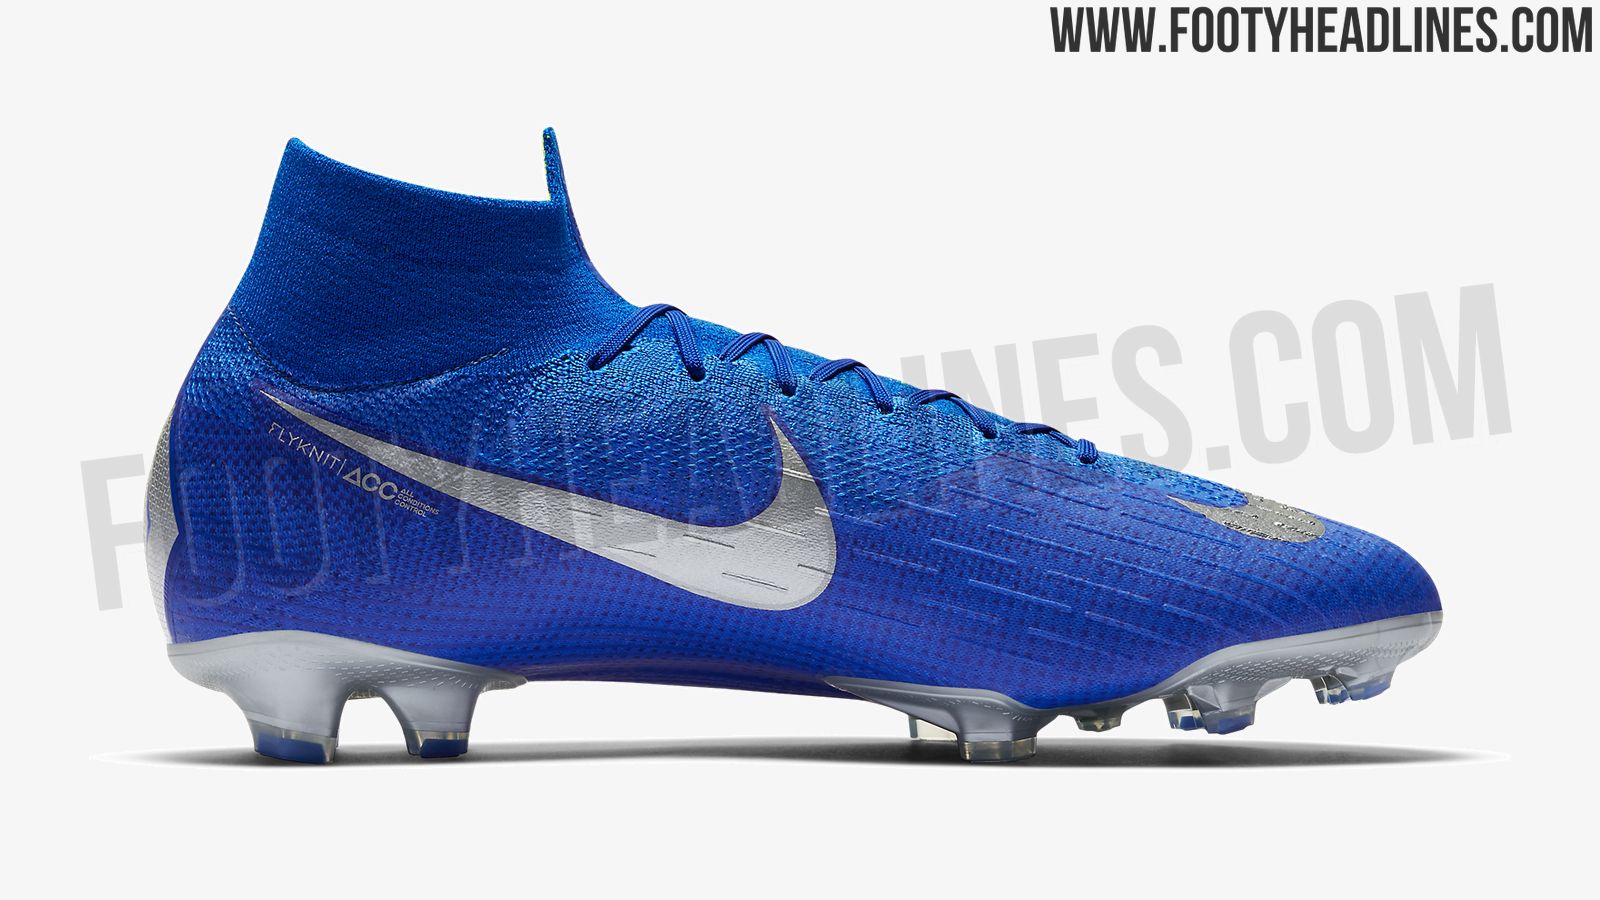 Blue Silver / Volt' Mercurial Superfly 2018-2019 Boots Leaked - Footy Headlines